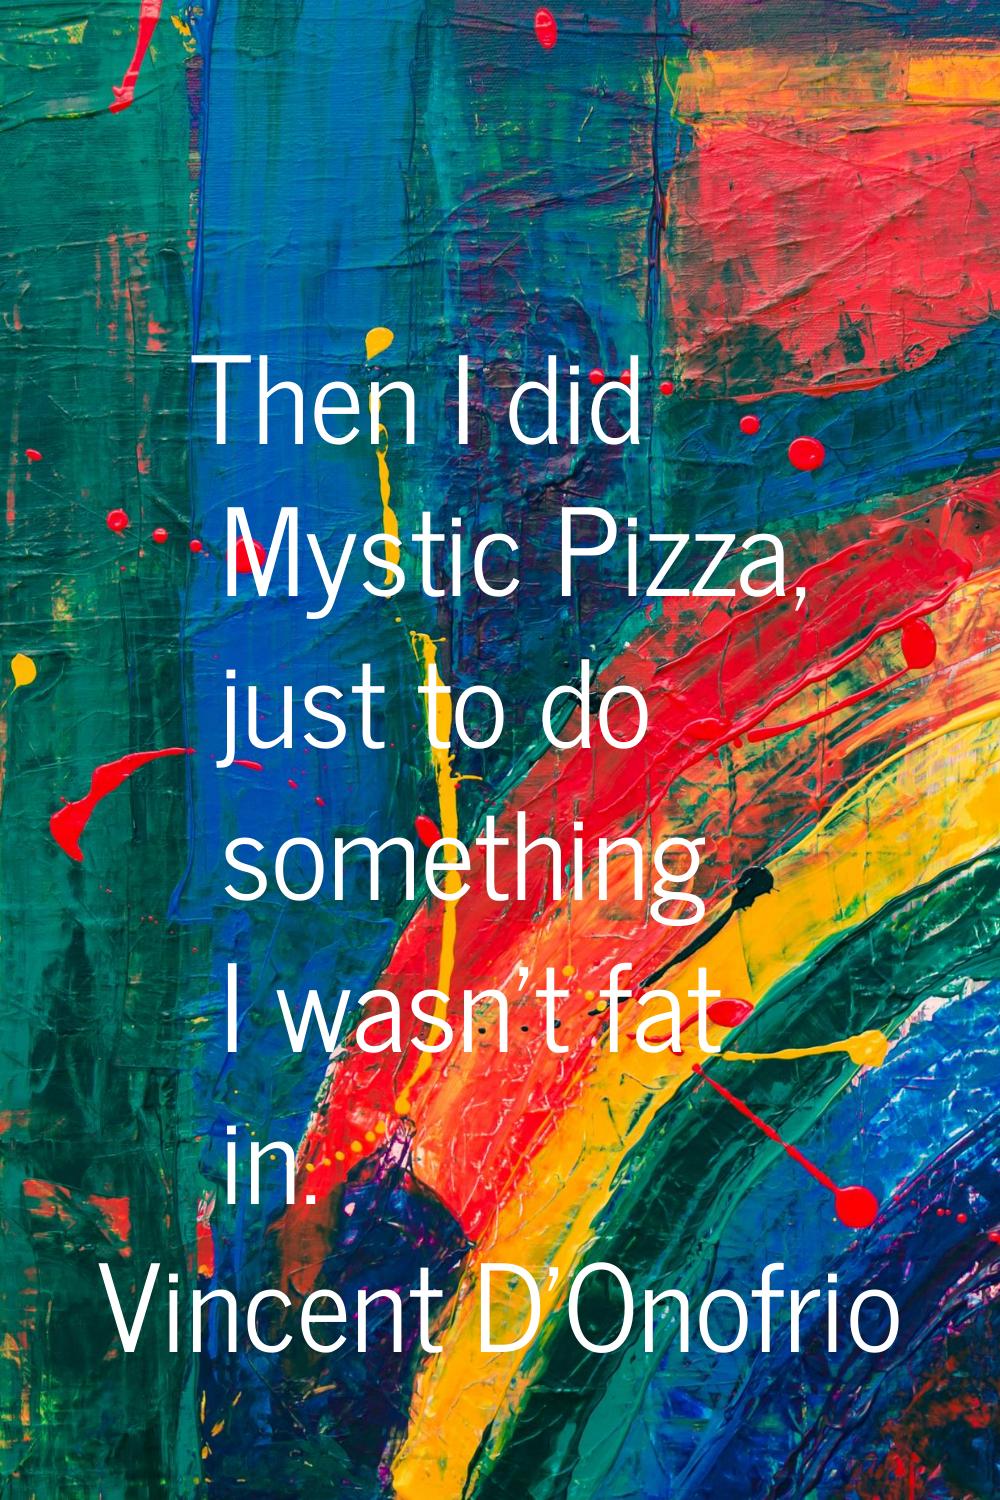 Then I did Mystic Pizza, just to do something I wasn't fat in.